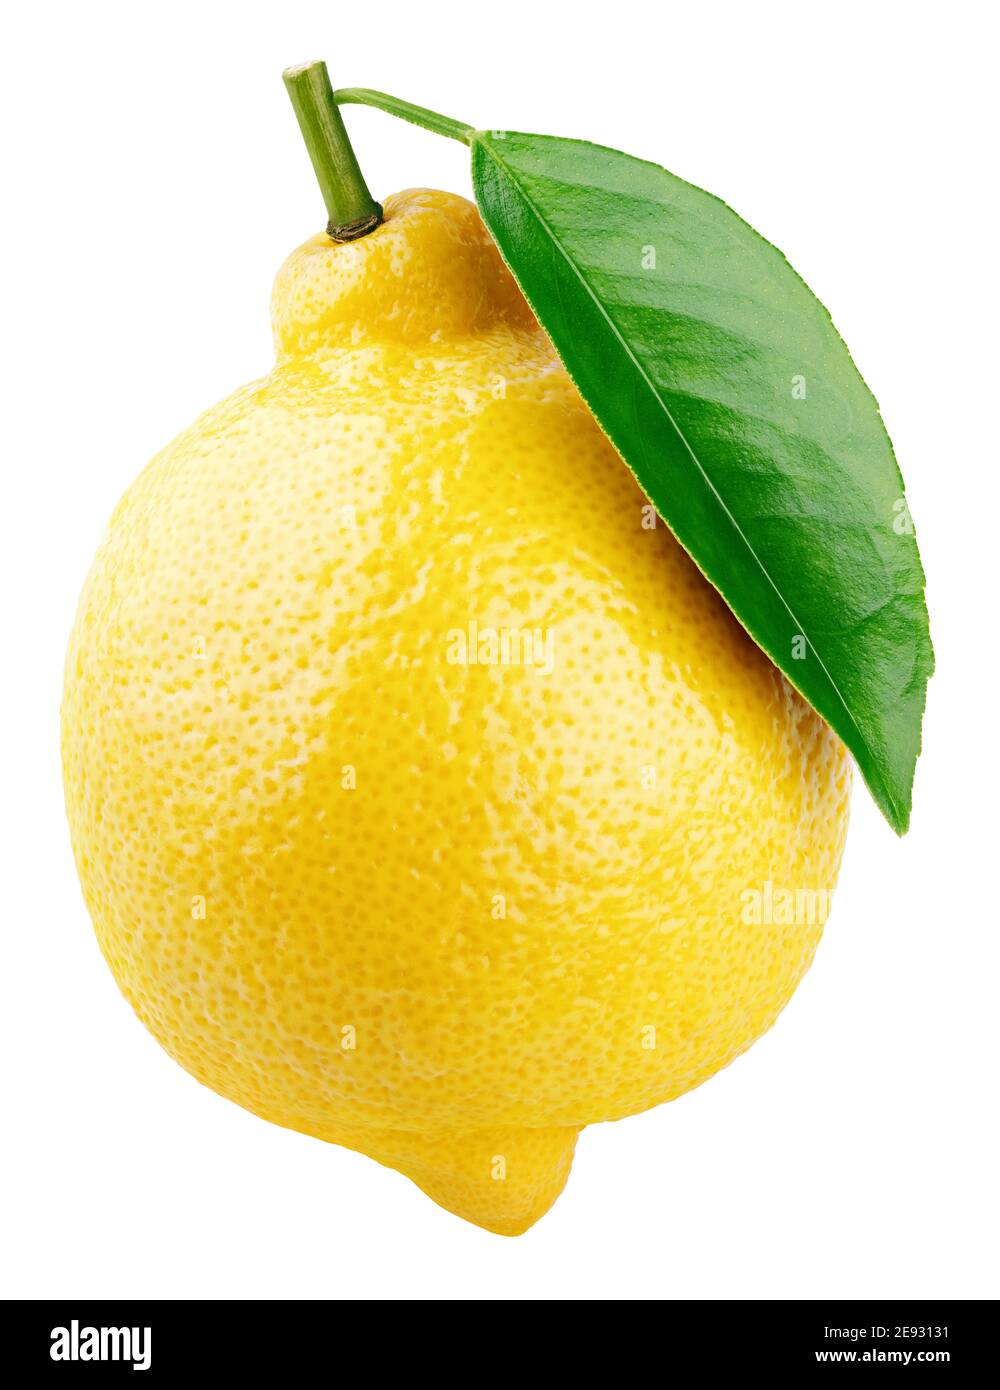 Ripe whole yellow lemon citrus fruit with green leaf isolated on white background. With clipping path. Full depth of field. Stock Photo